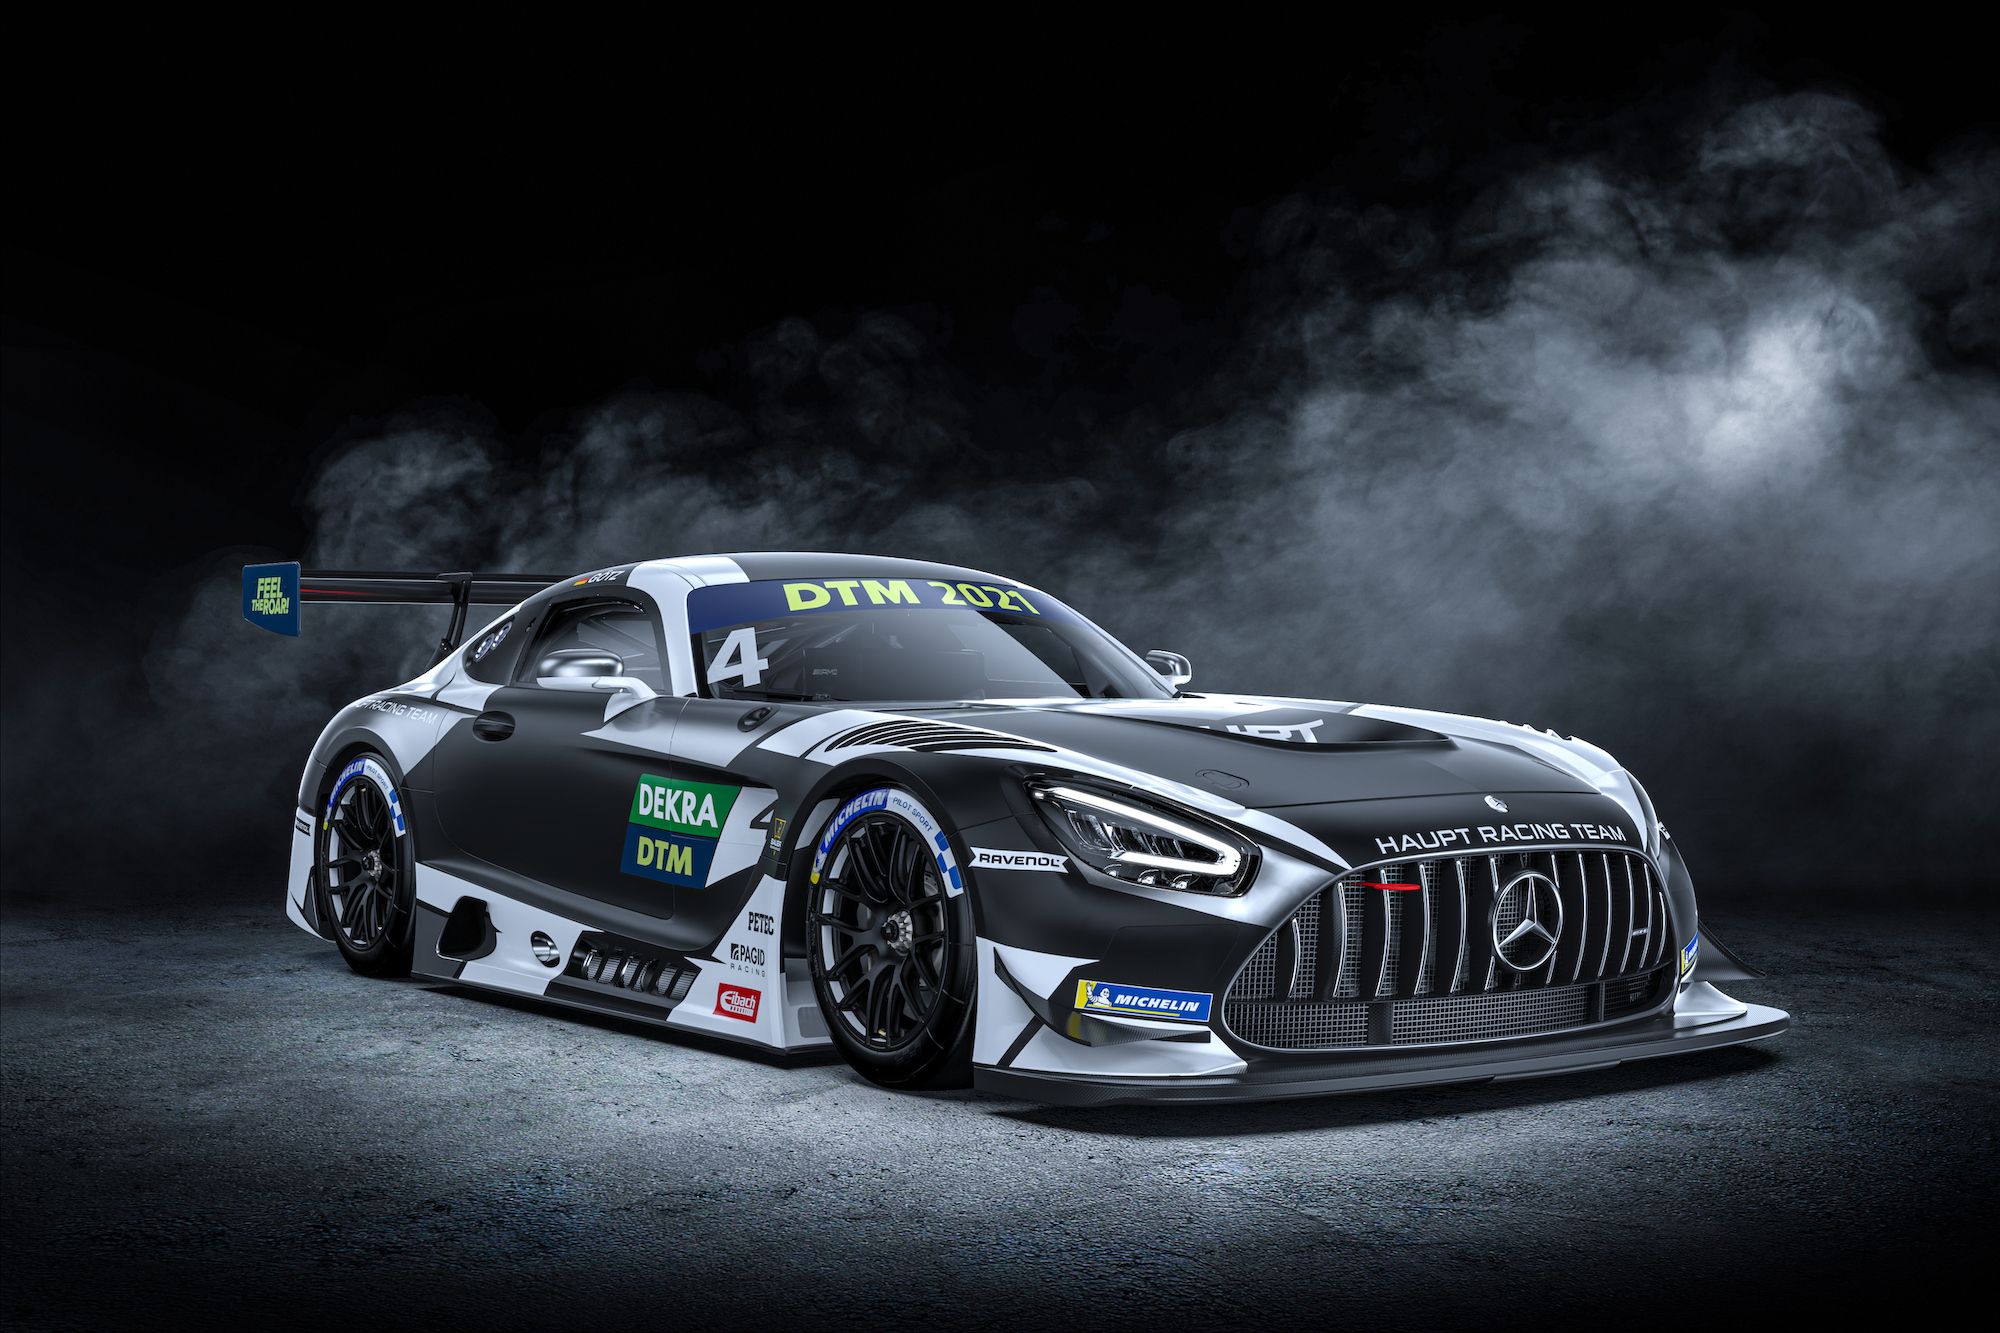 Mercedes-AMG to start a new chapter in its motorsport history